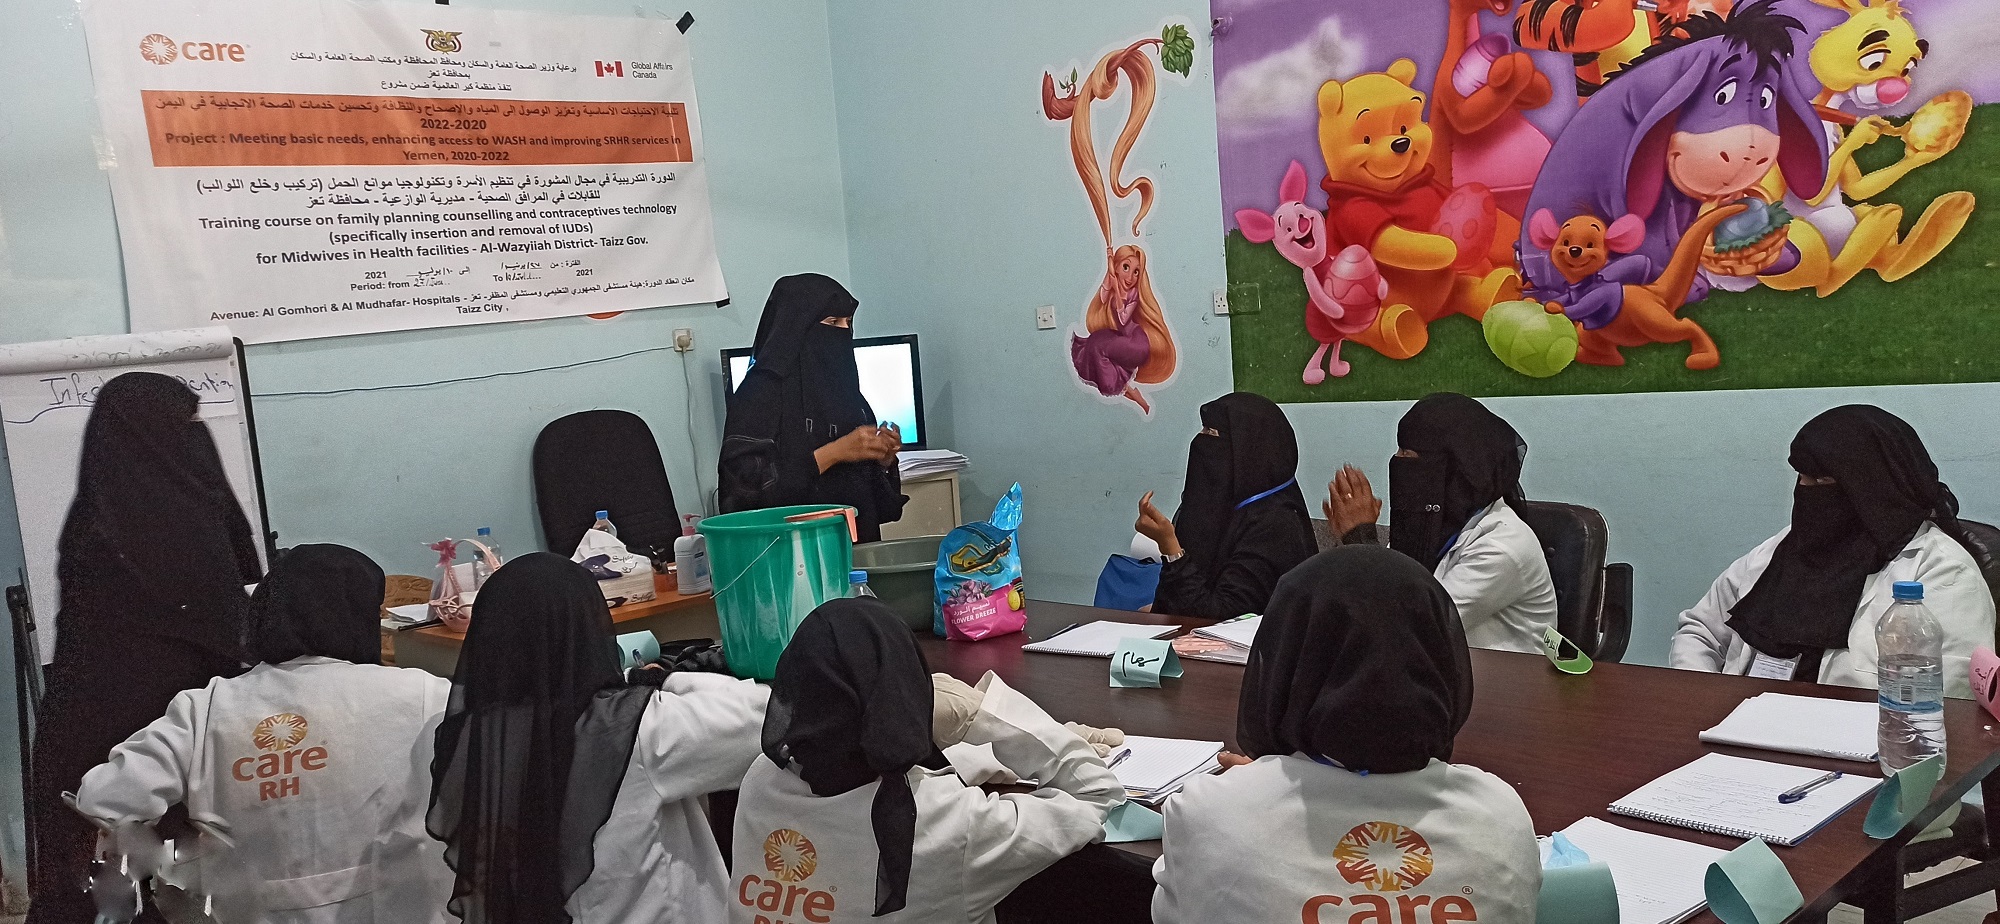 A group of women wearing black Hijabs sitting in a a training room setup